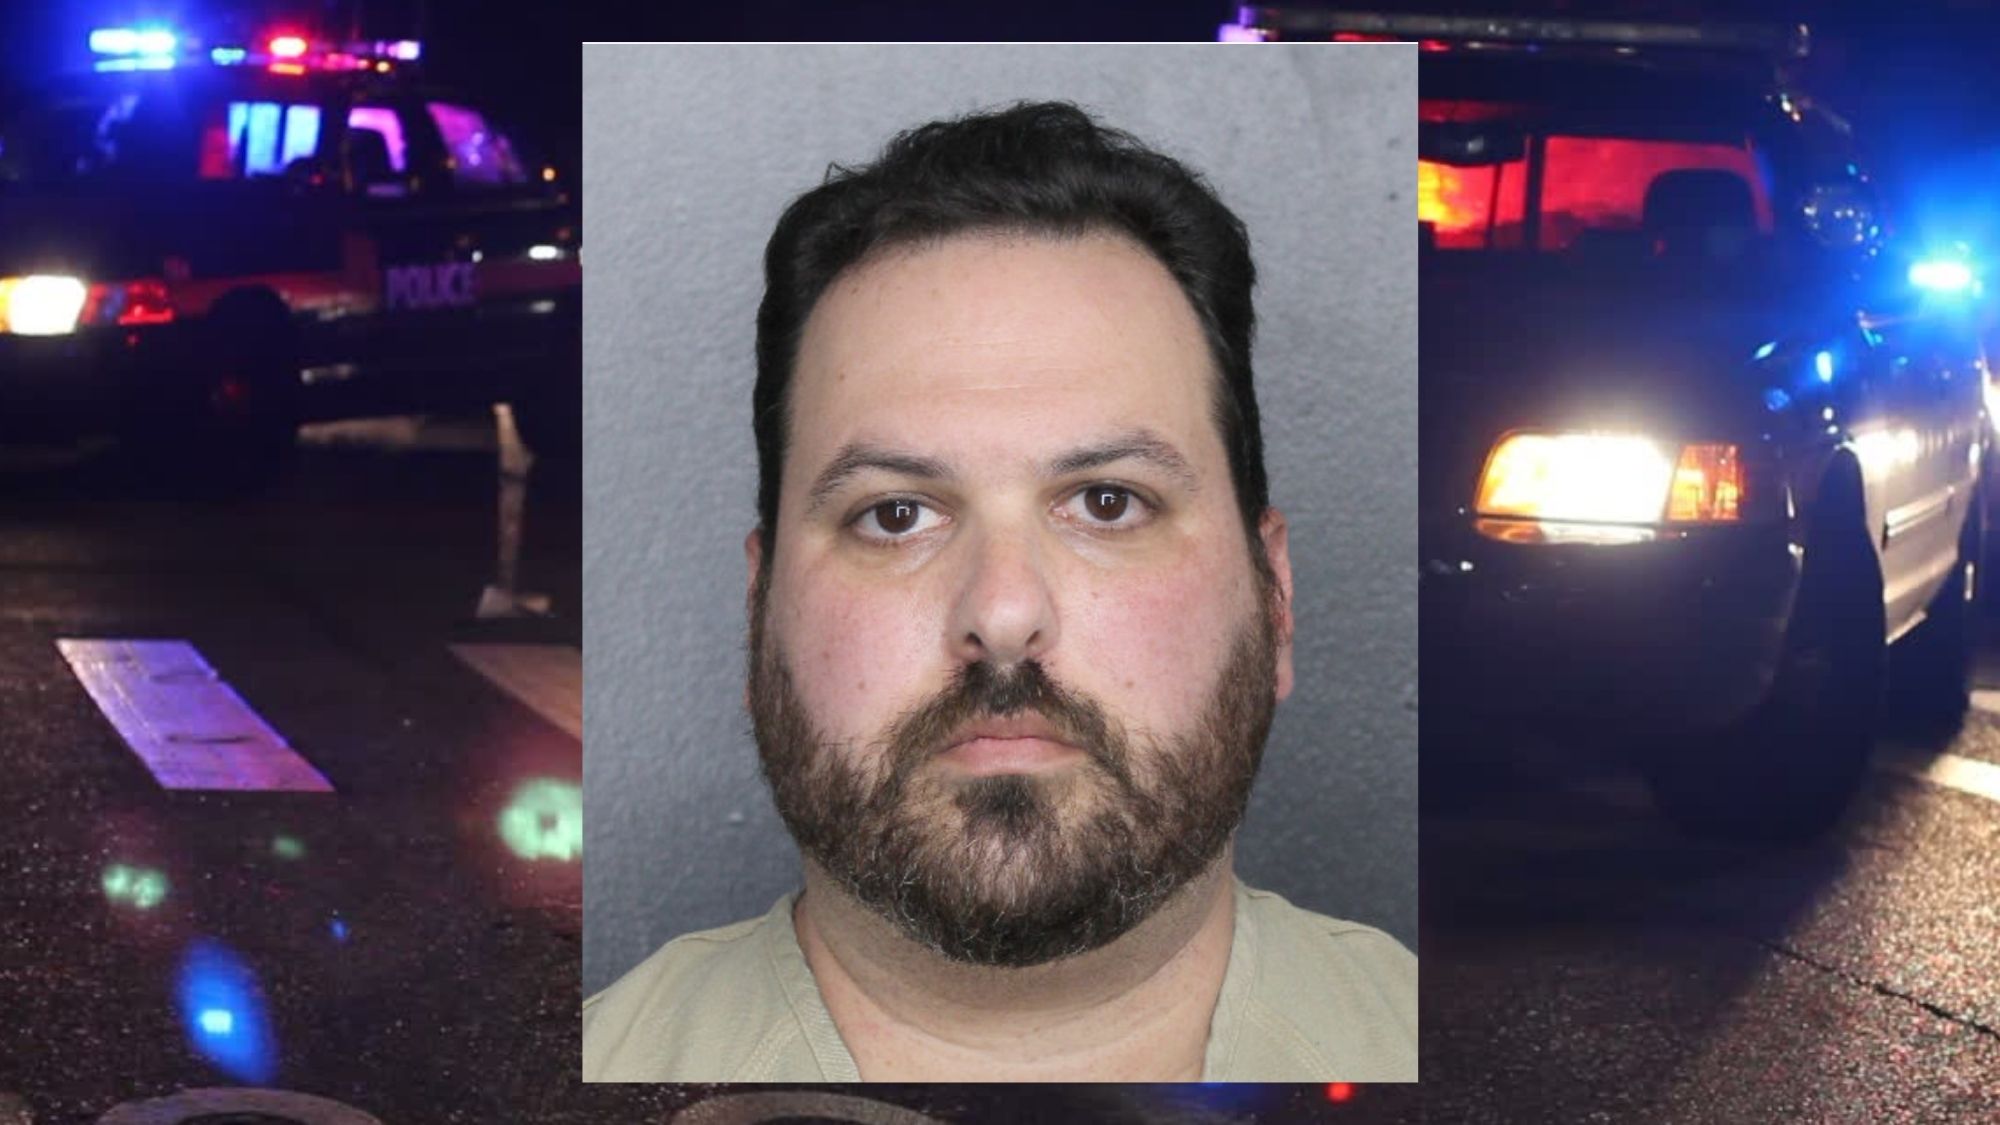 Tamarac Man Arrested For Raping Child: “I’m a Piece of S— and I Deserve to go to Jail”